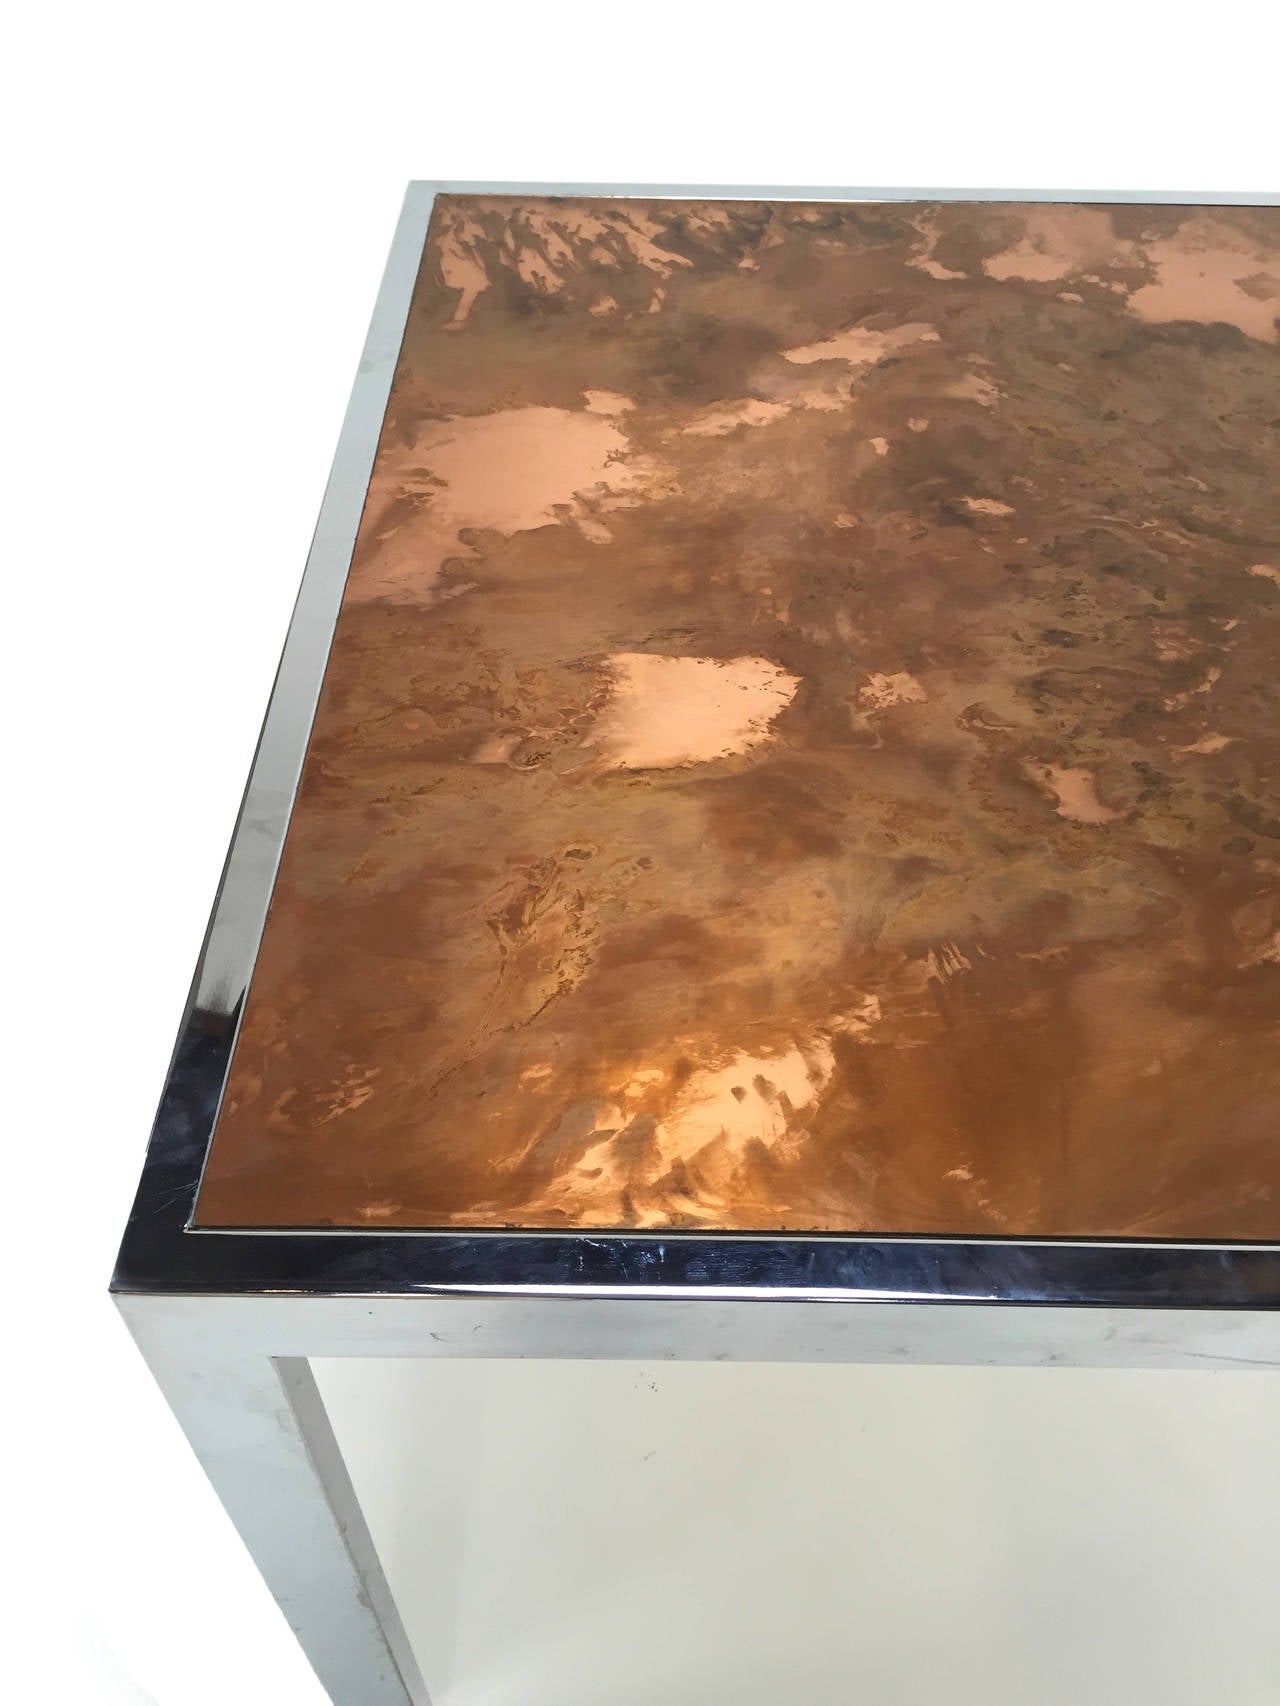 Table top surface of acid washed copper. Widely cherished Baughman signature architectural chrome rectangular stock frame. The inset top of chemically treated copper feels as if its exploding with fire and drama yet remains contained within the